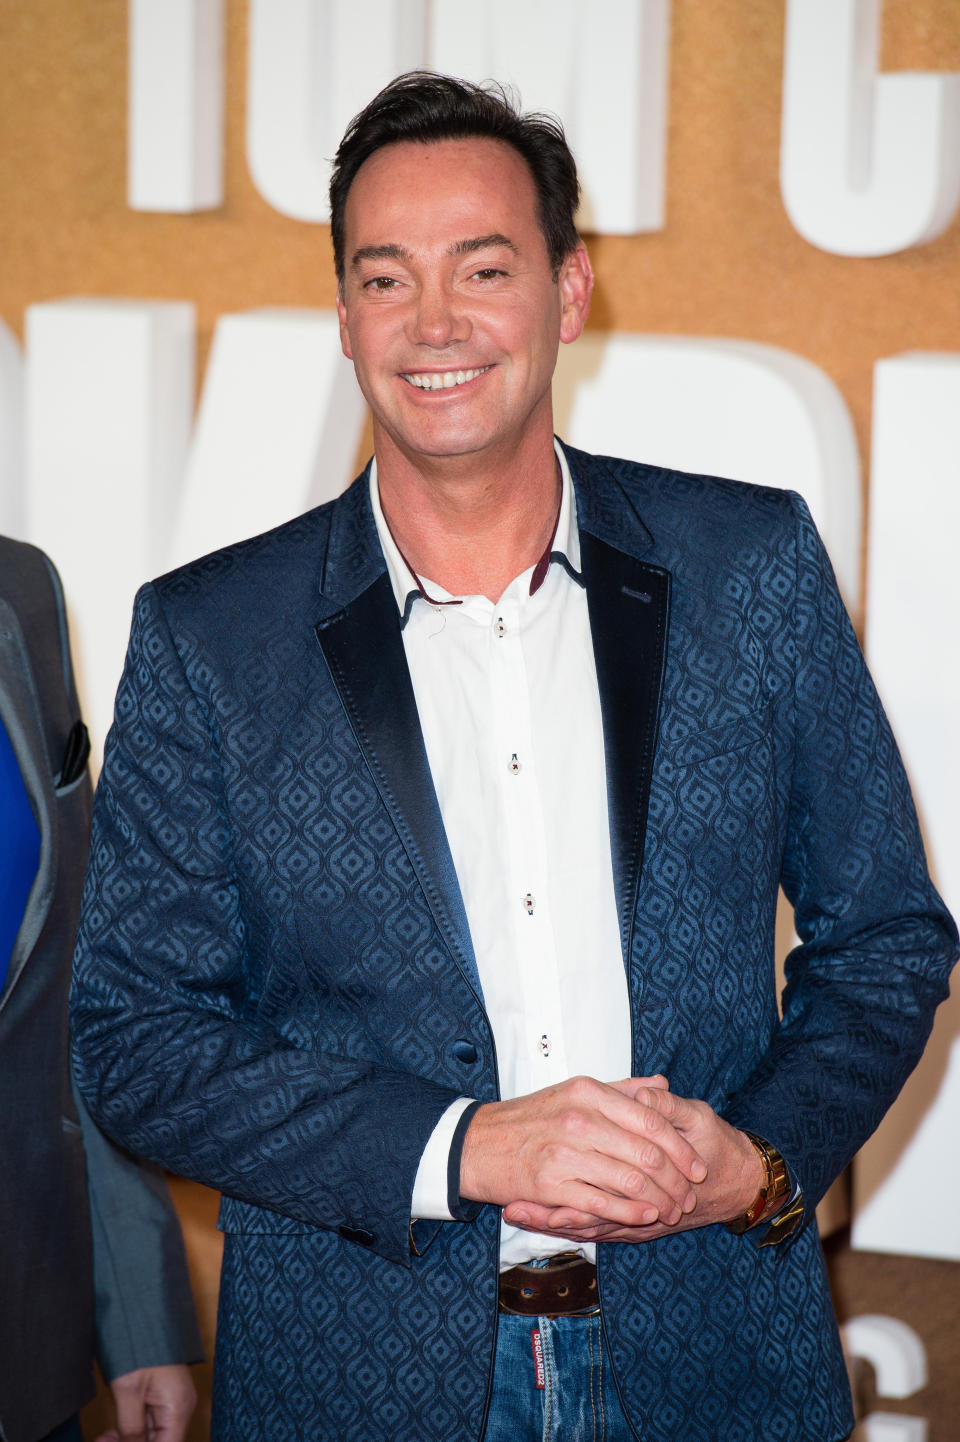 Strictly Come Dancing judge Craig Revel Horwood has named his top pick to take home the Glitterball Trophy.